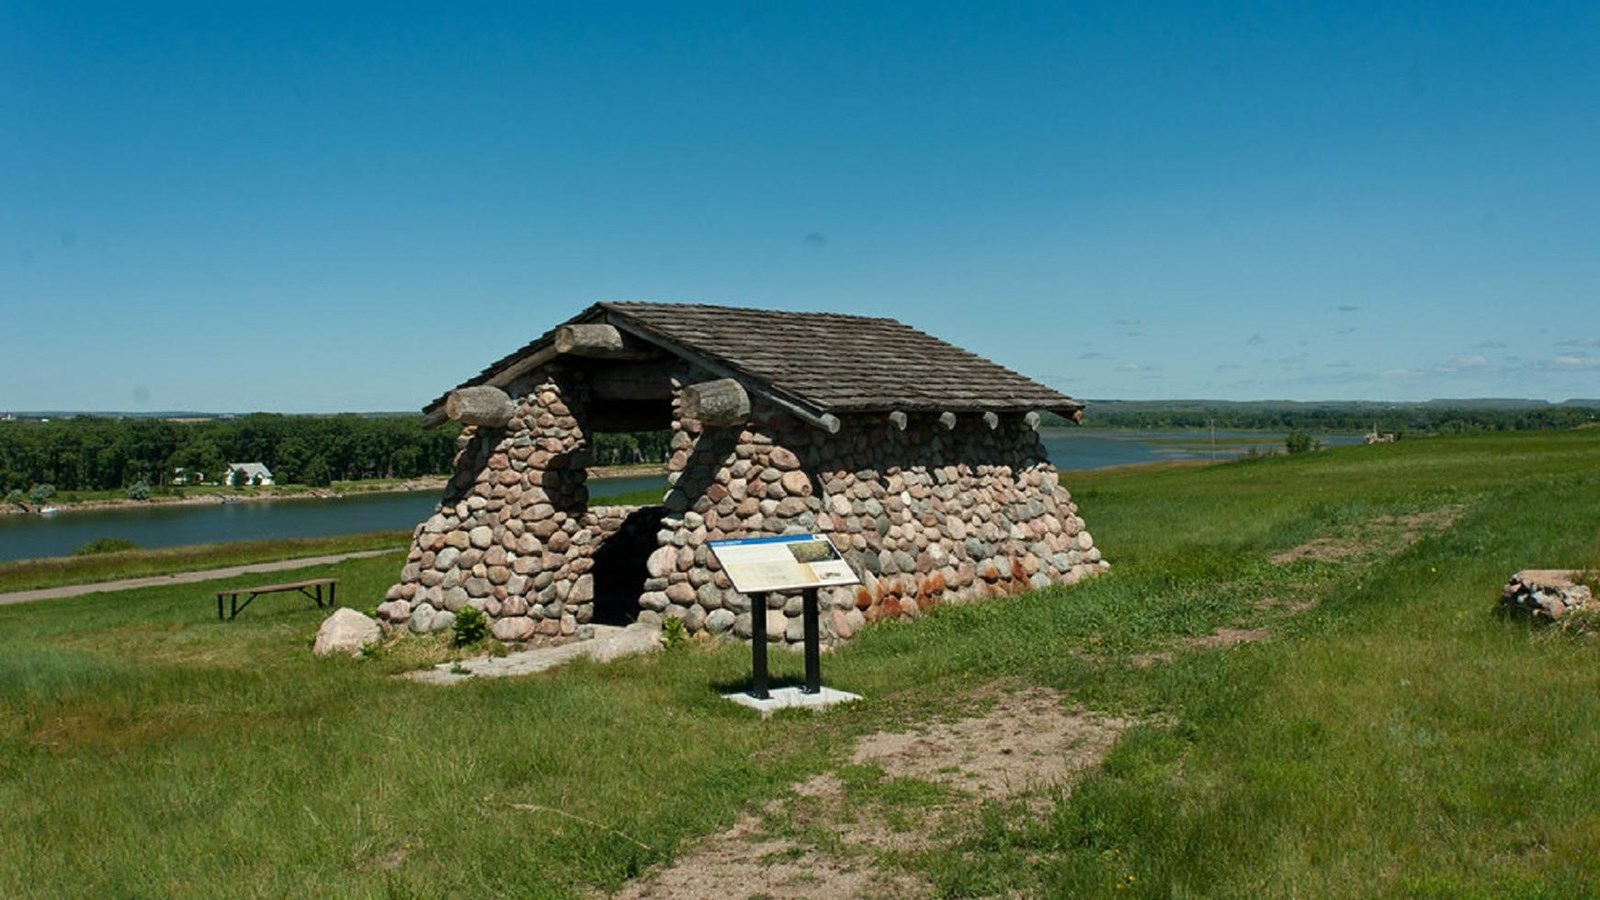 A fieldstone structure with an interpretive panel along the shore of the Missouri River